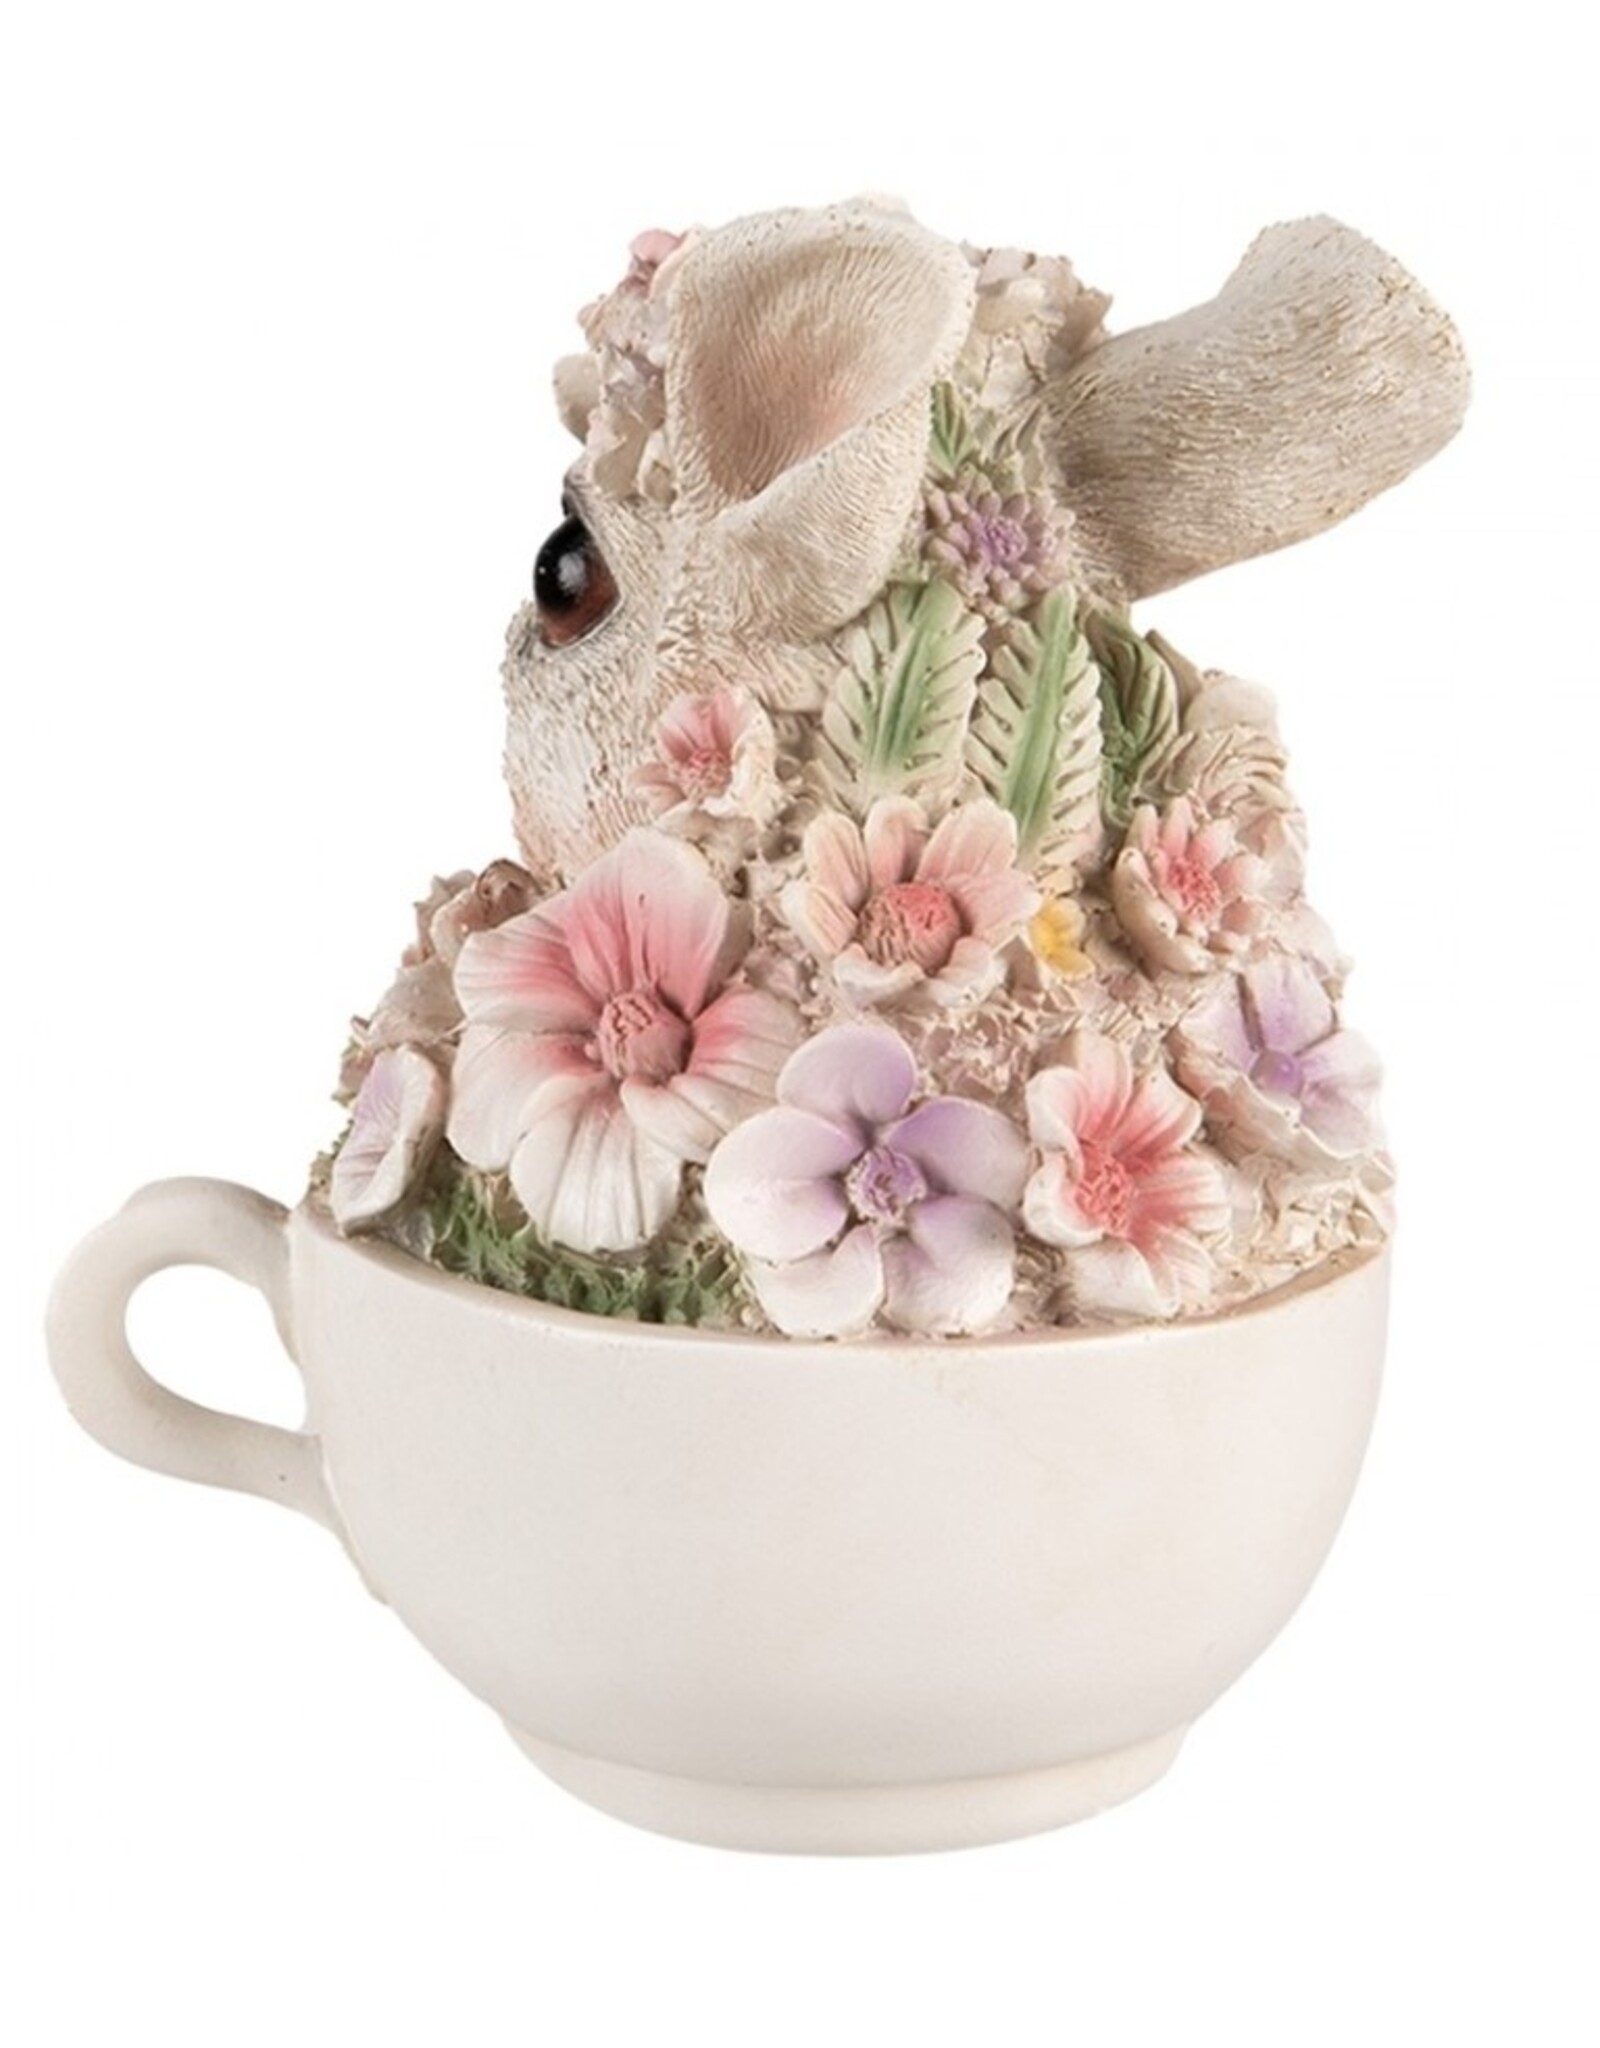 C&E Giftware & Lifestyle - Bunny in Teacup figurine decorated with Pink Flowers